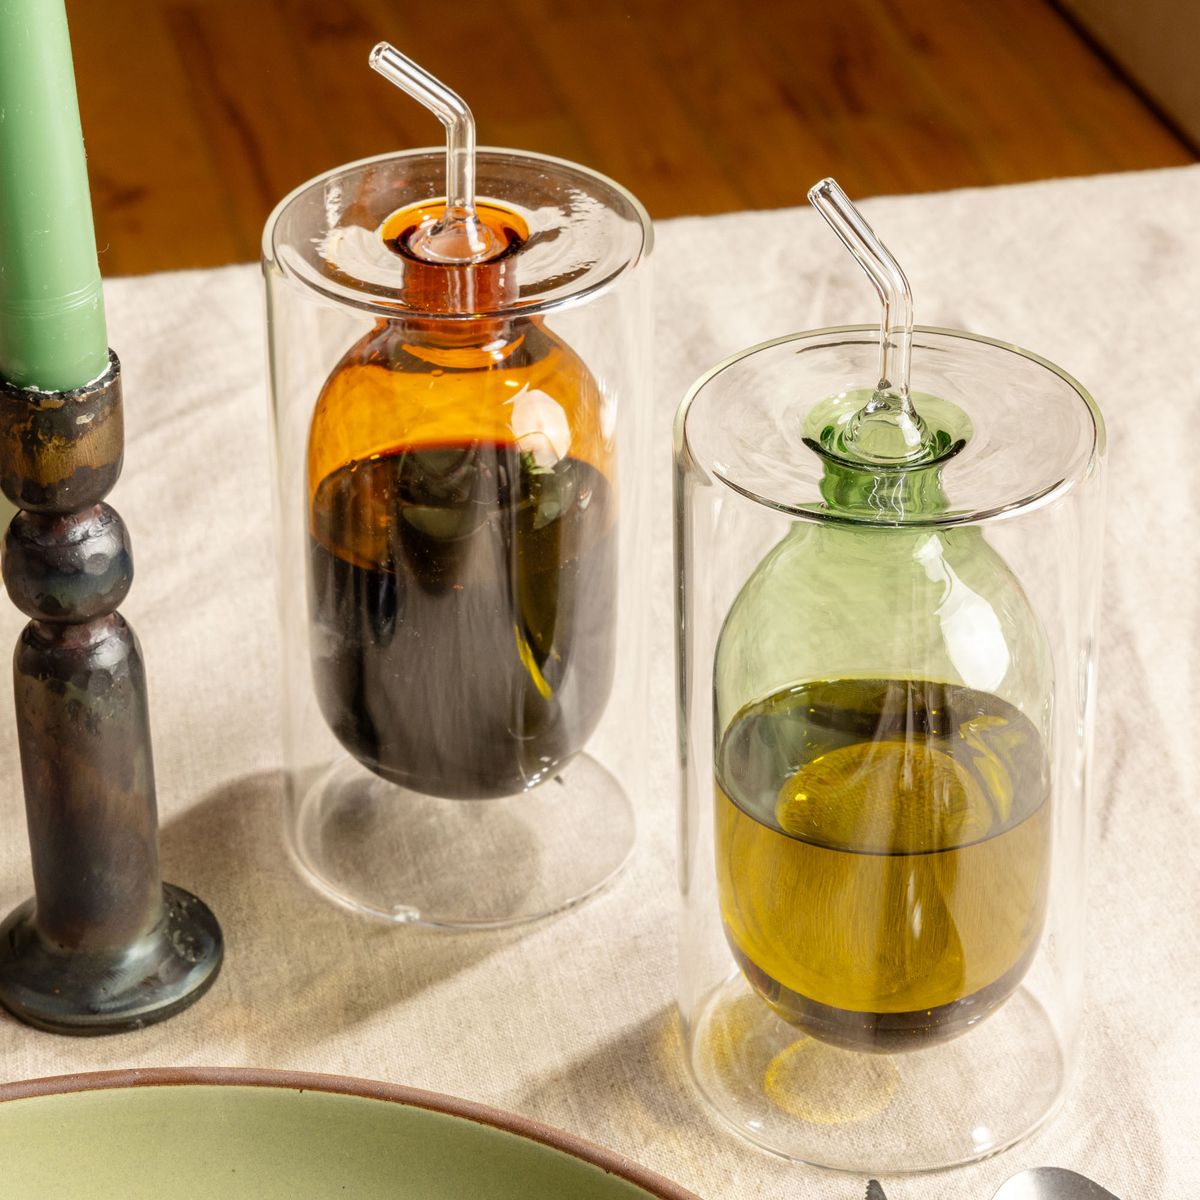 Two artful glass cruets in a an orange and light green color. There is a rounded bulb that acts as a container for the cruet, surrounded by a doubled glass wall.